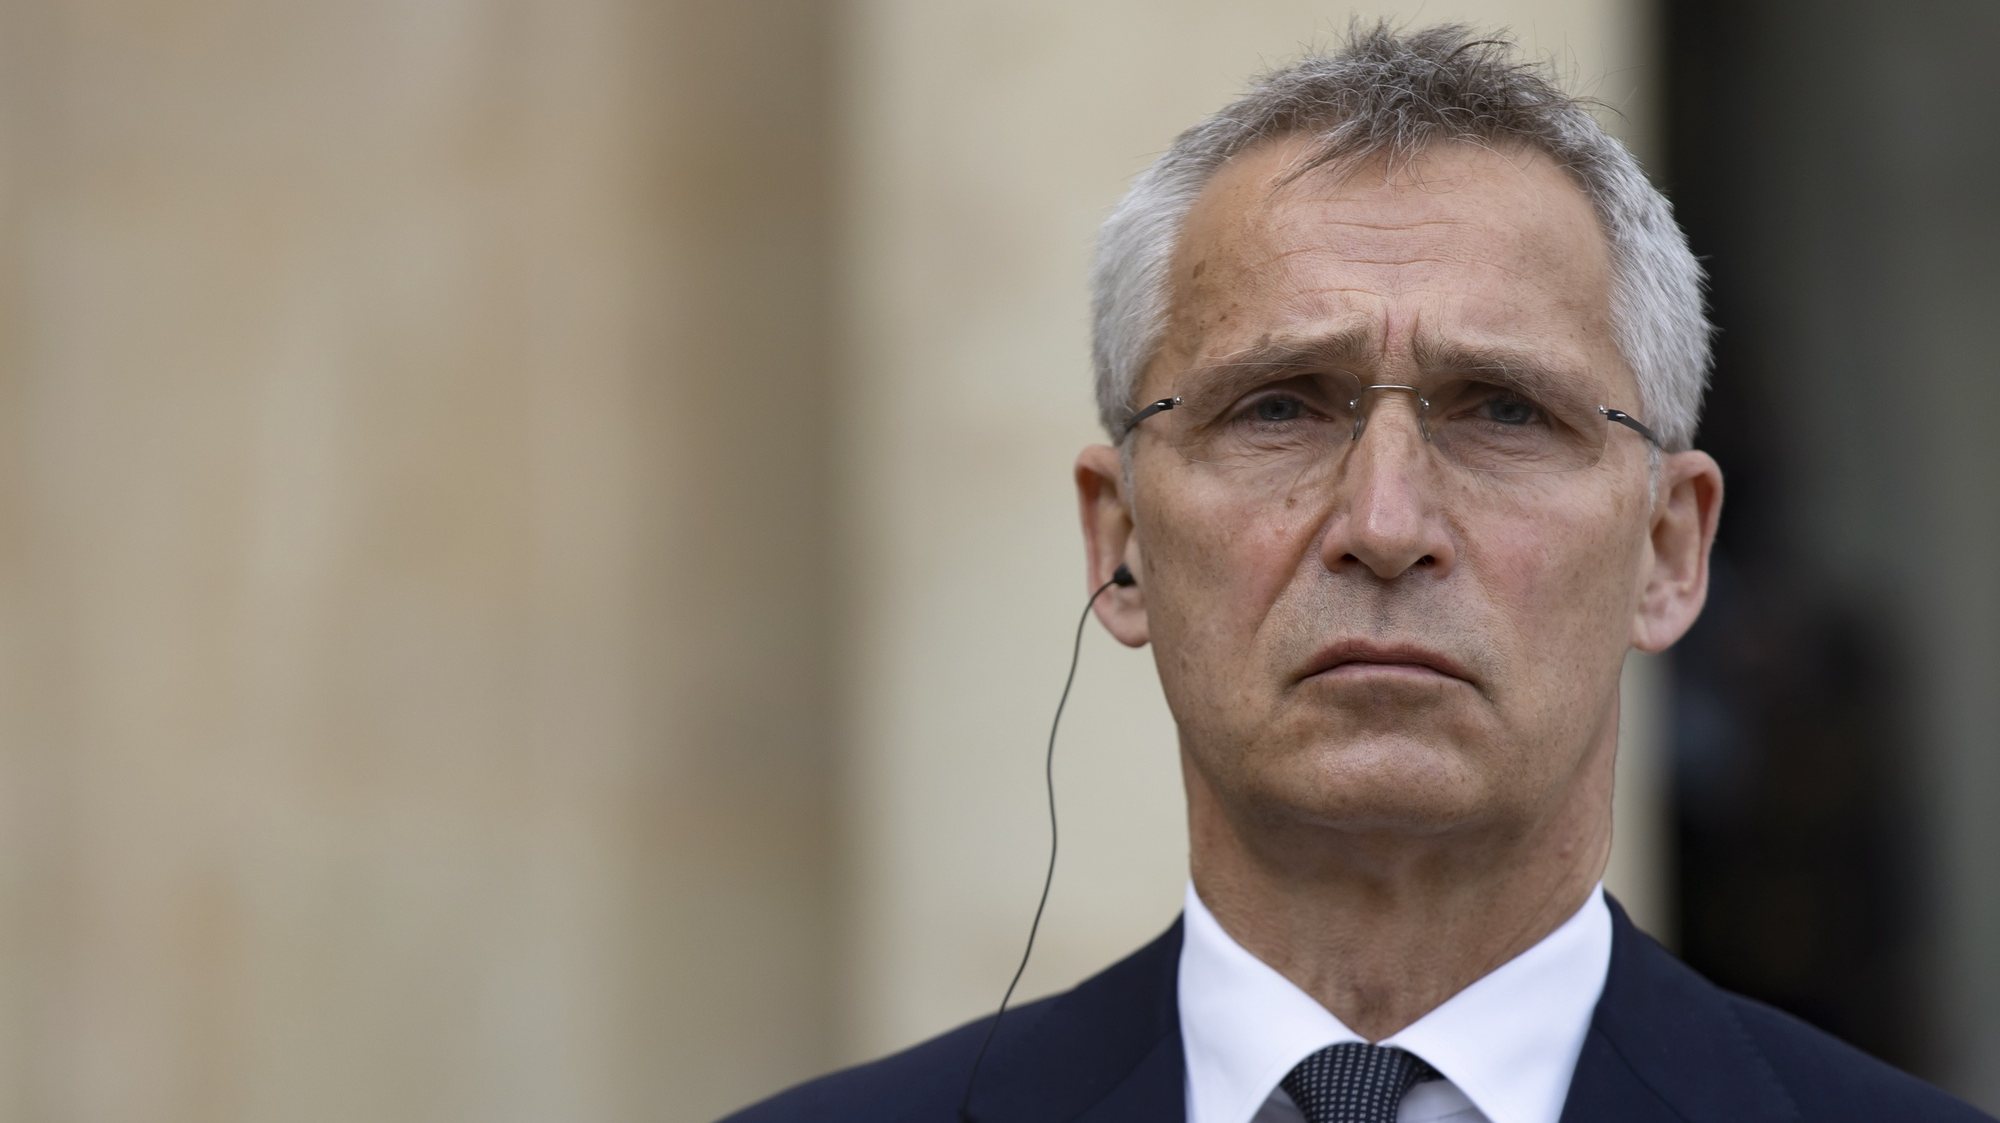 epa09217072 NATO Secretary General Jens Stoltenberg looks on during a joint statement with French President Macron after their meeting at the Elysee Palace in Paris, France, 21 May 2021. Both met to discuss preparations for the upcoming NATO Summit on 14 June 2021.  EPA/IAN LANGSDON